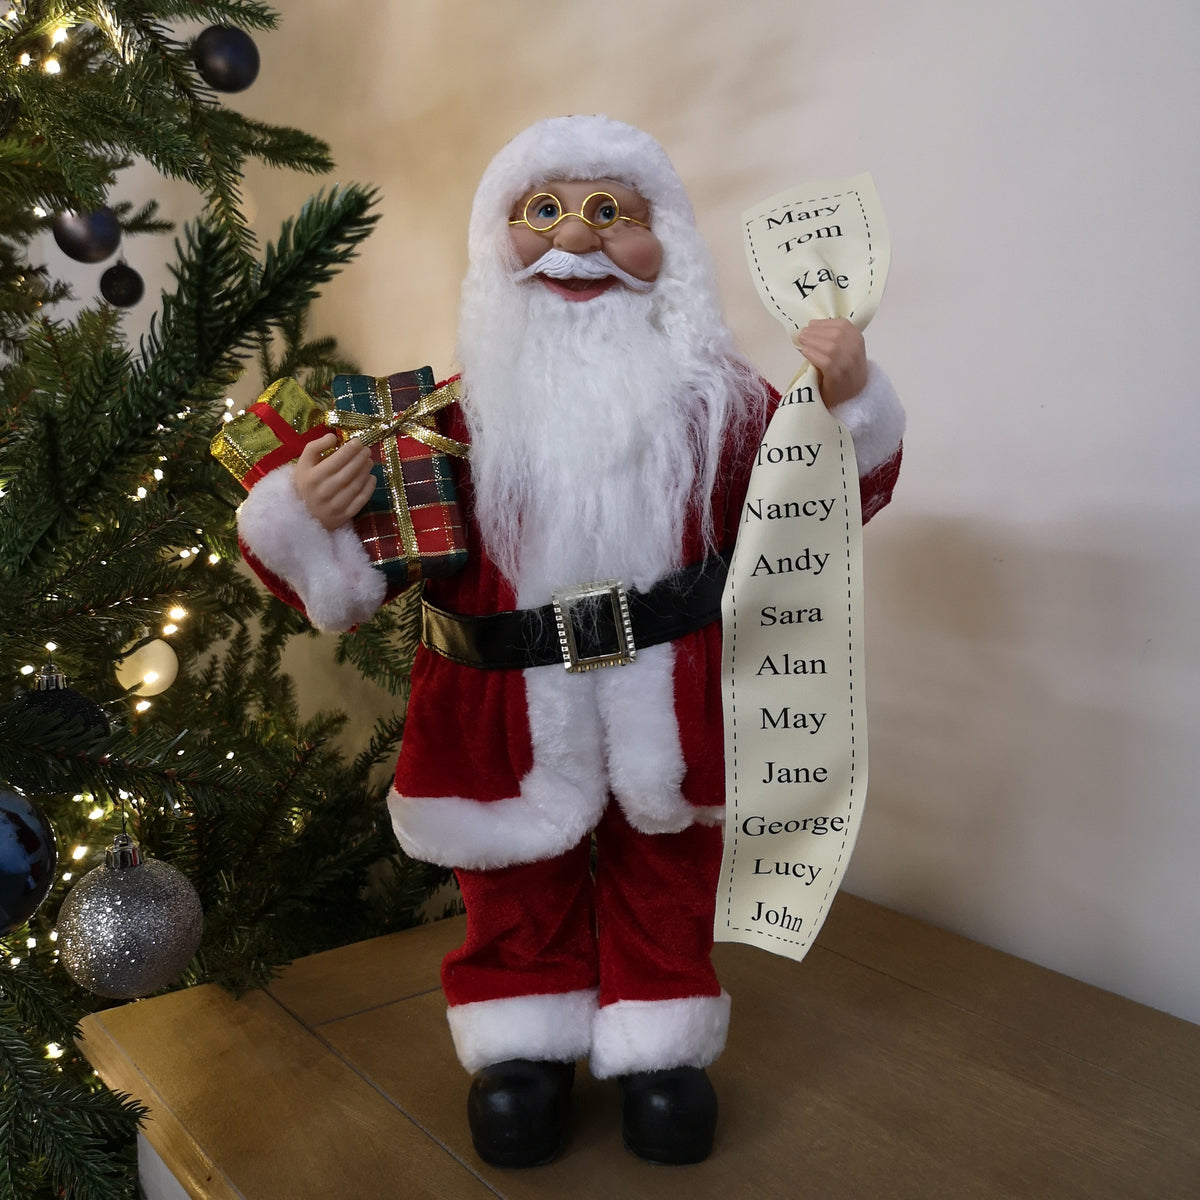 40cm Standing Santa Claus Father Christmas Decoration Holding Name List & Gifts in Red